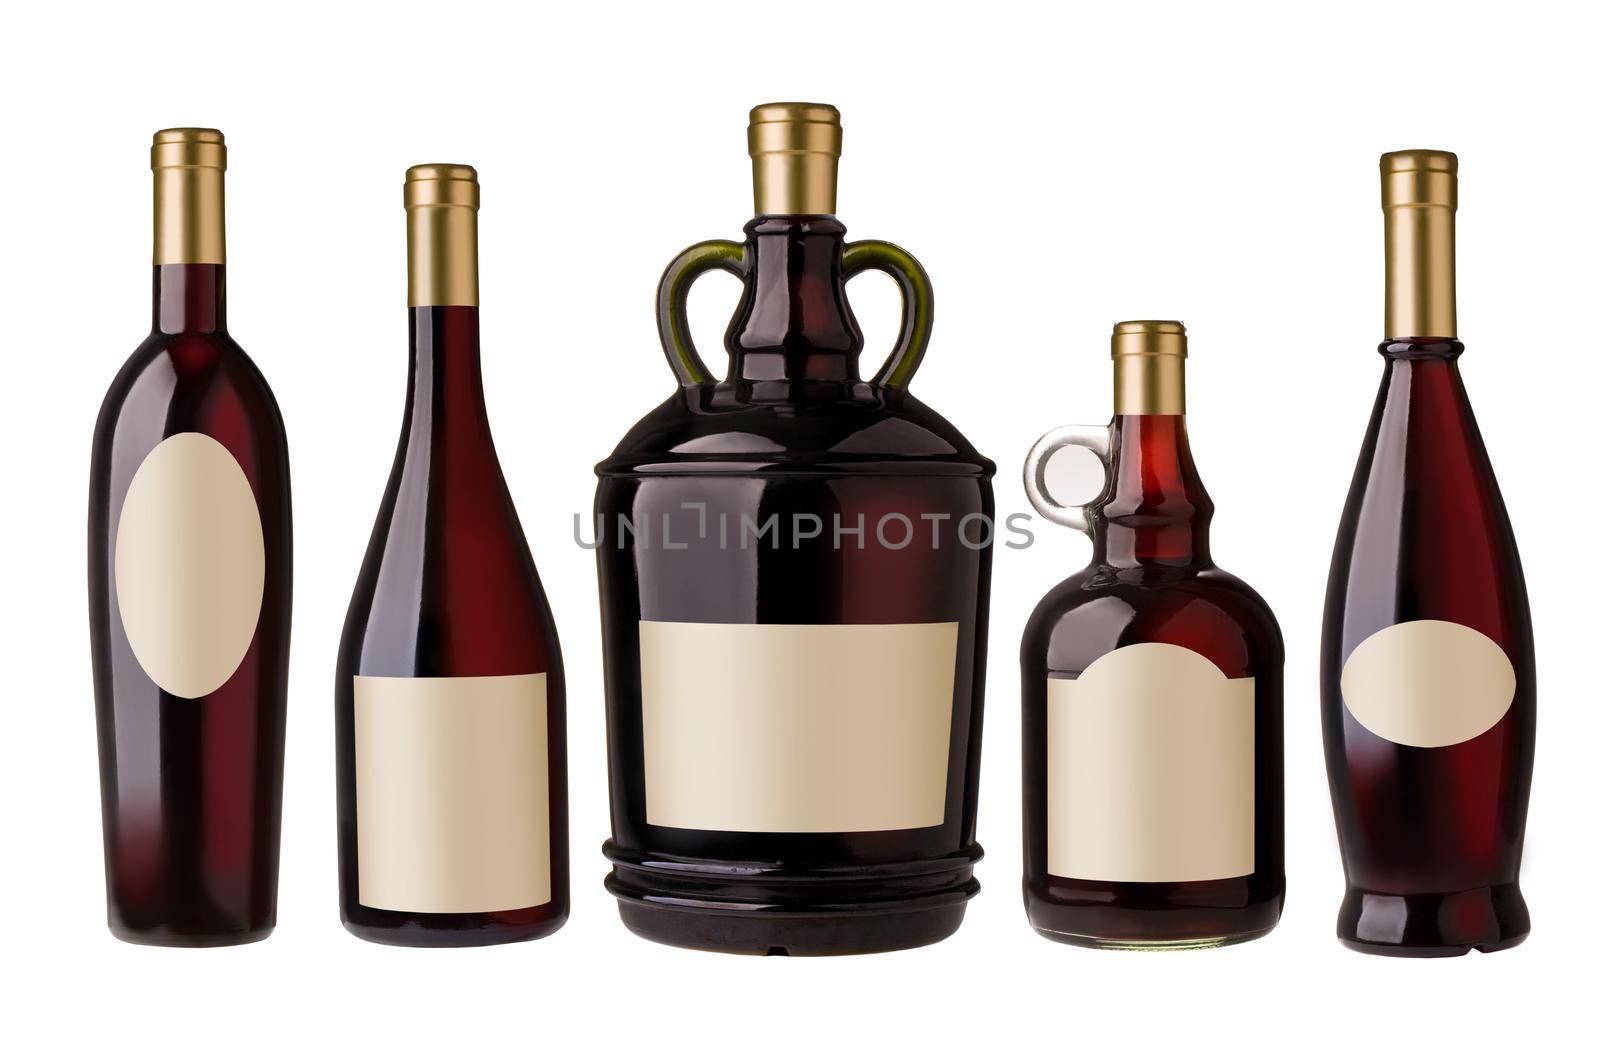  five wine bottles with blank label